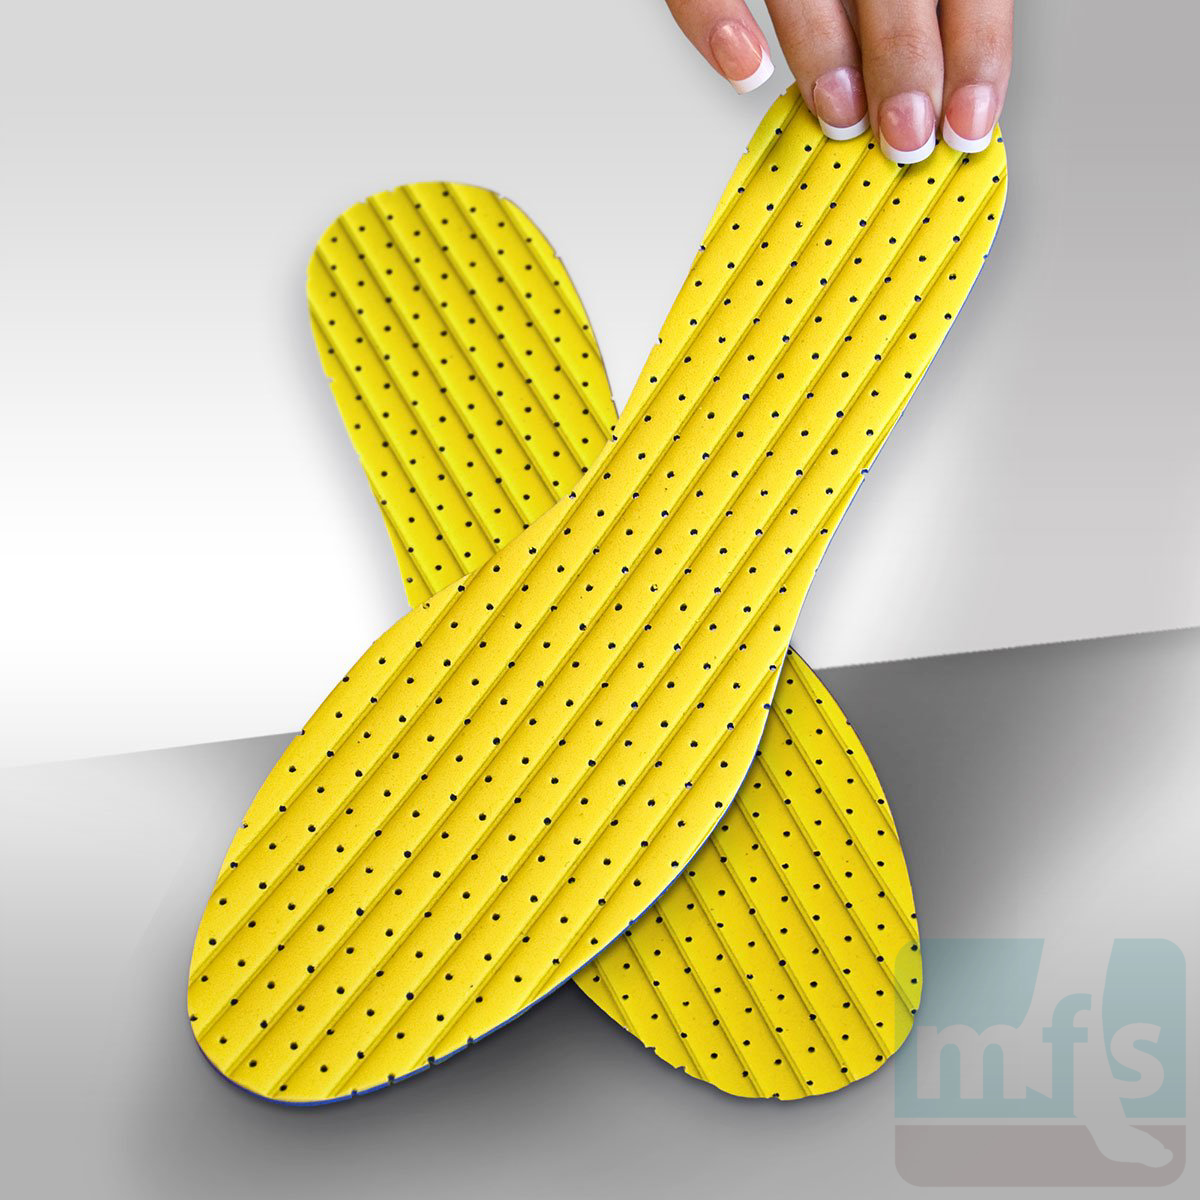 soft insoles for shoes